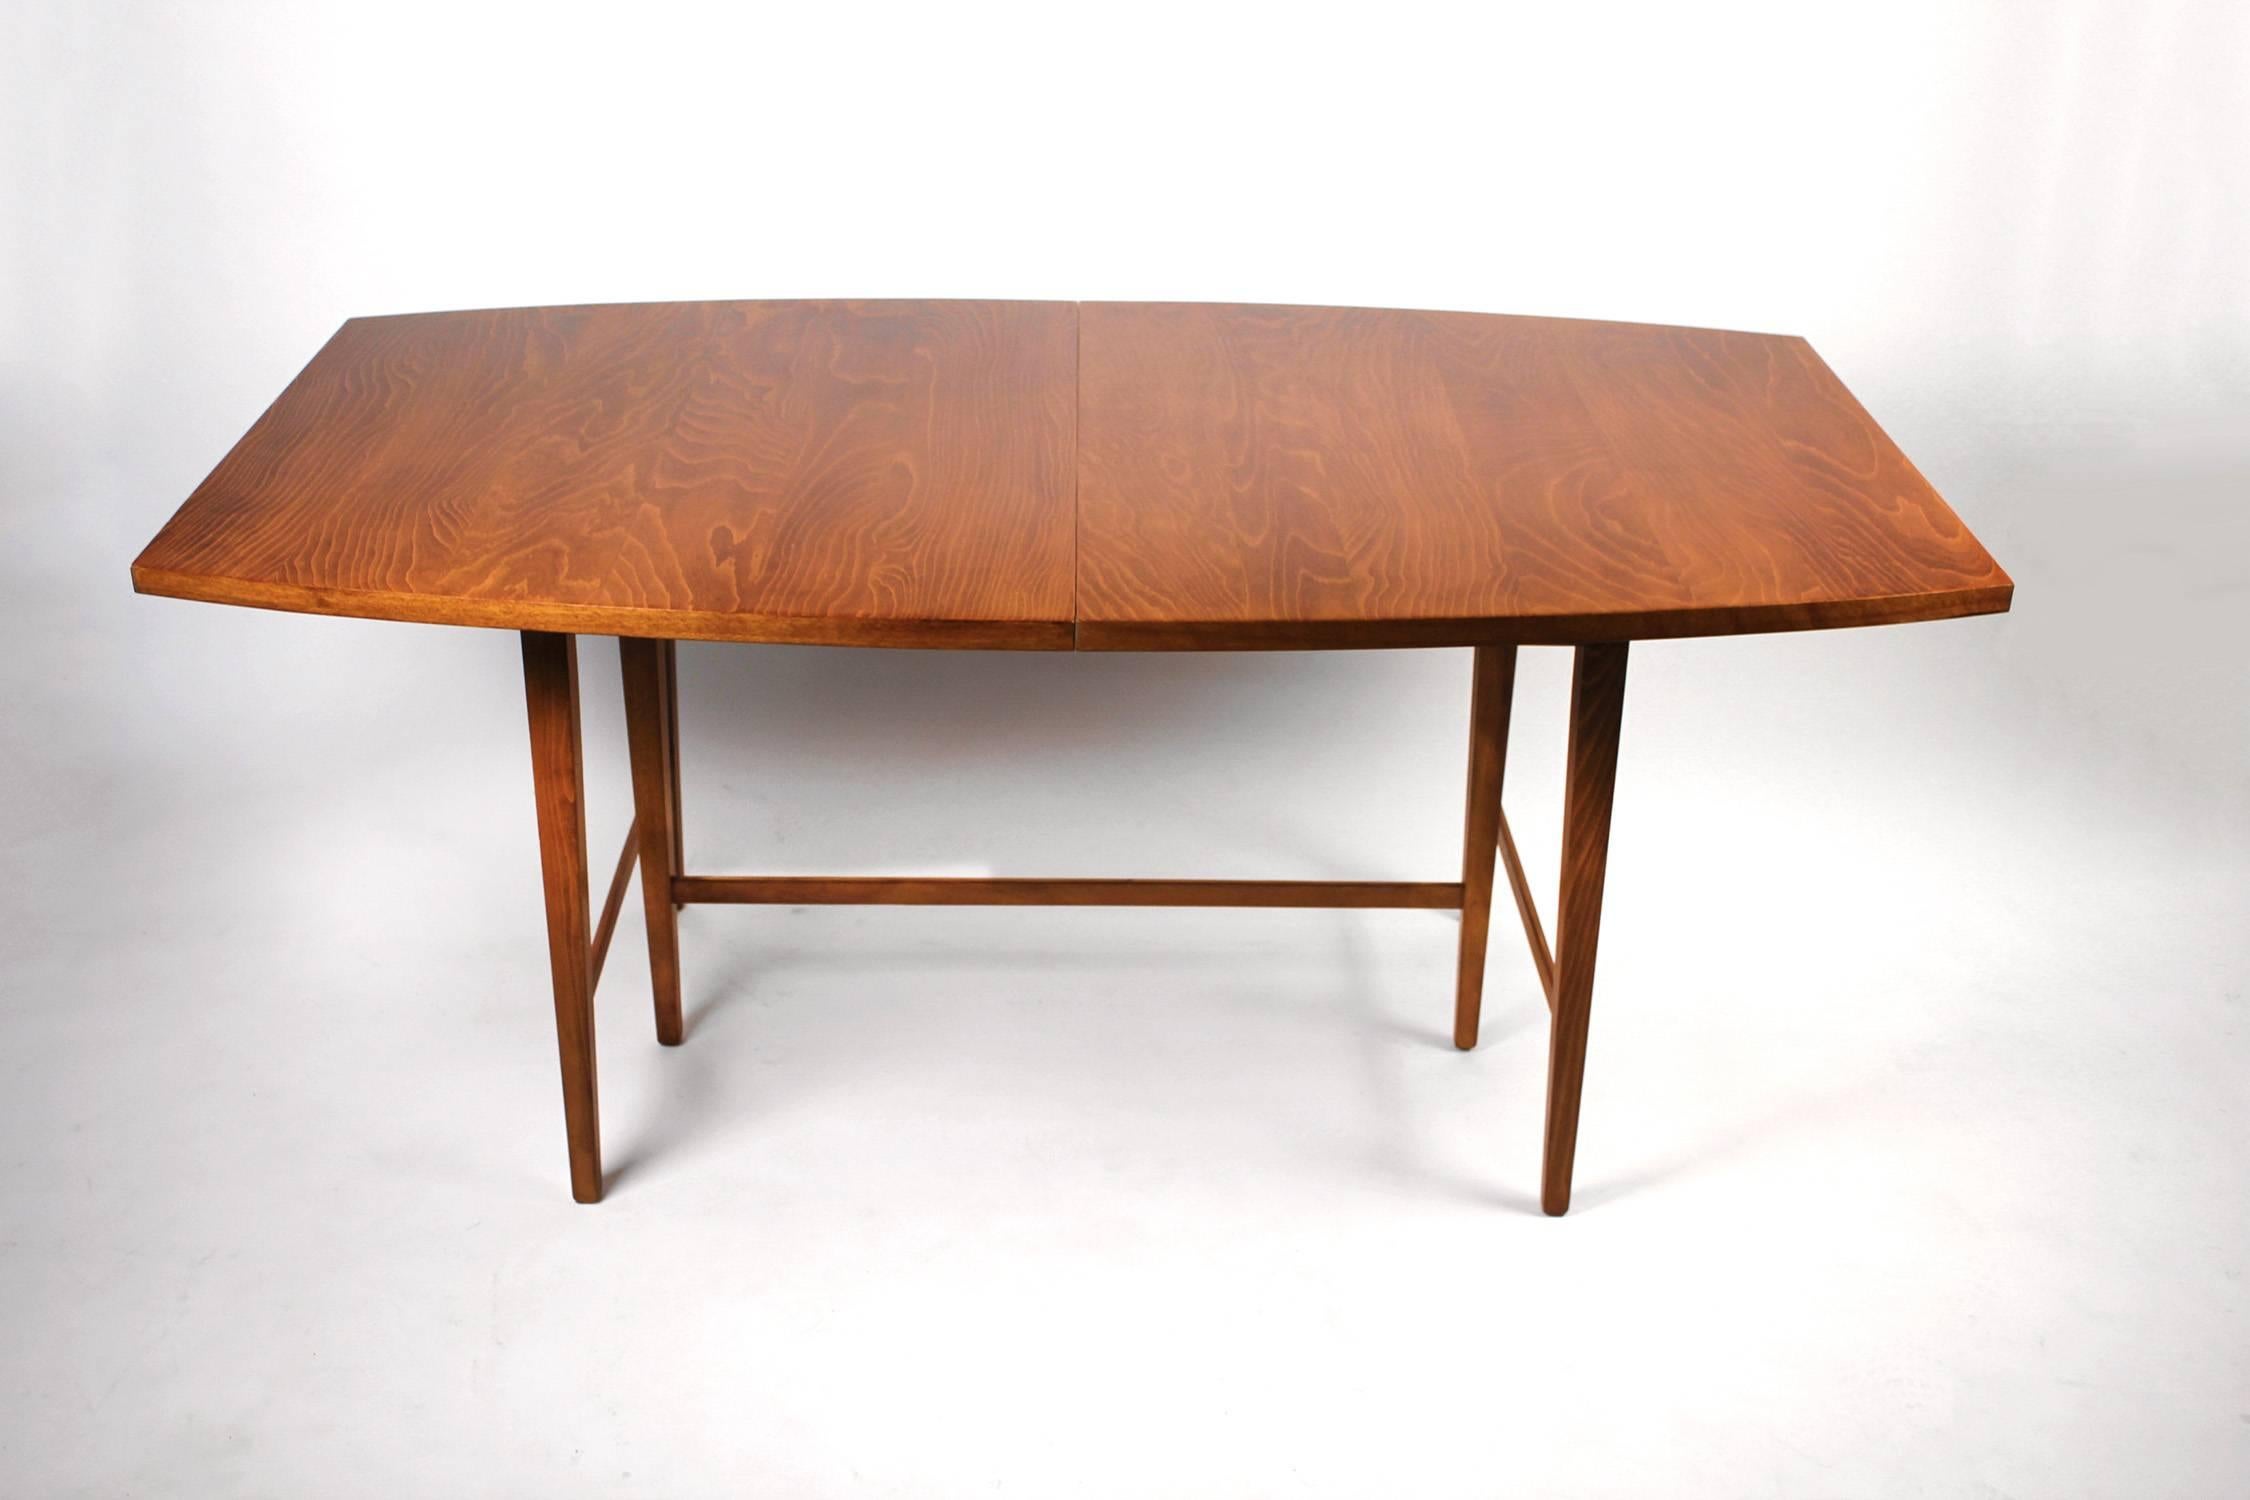 20th Century Paul McCobb Maple Perimeter Group Dining Table for Winchendon